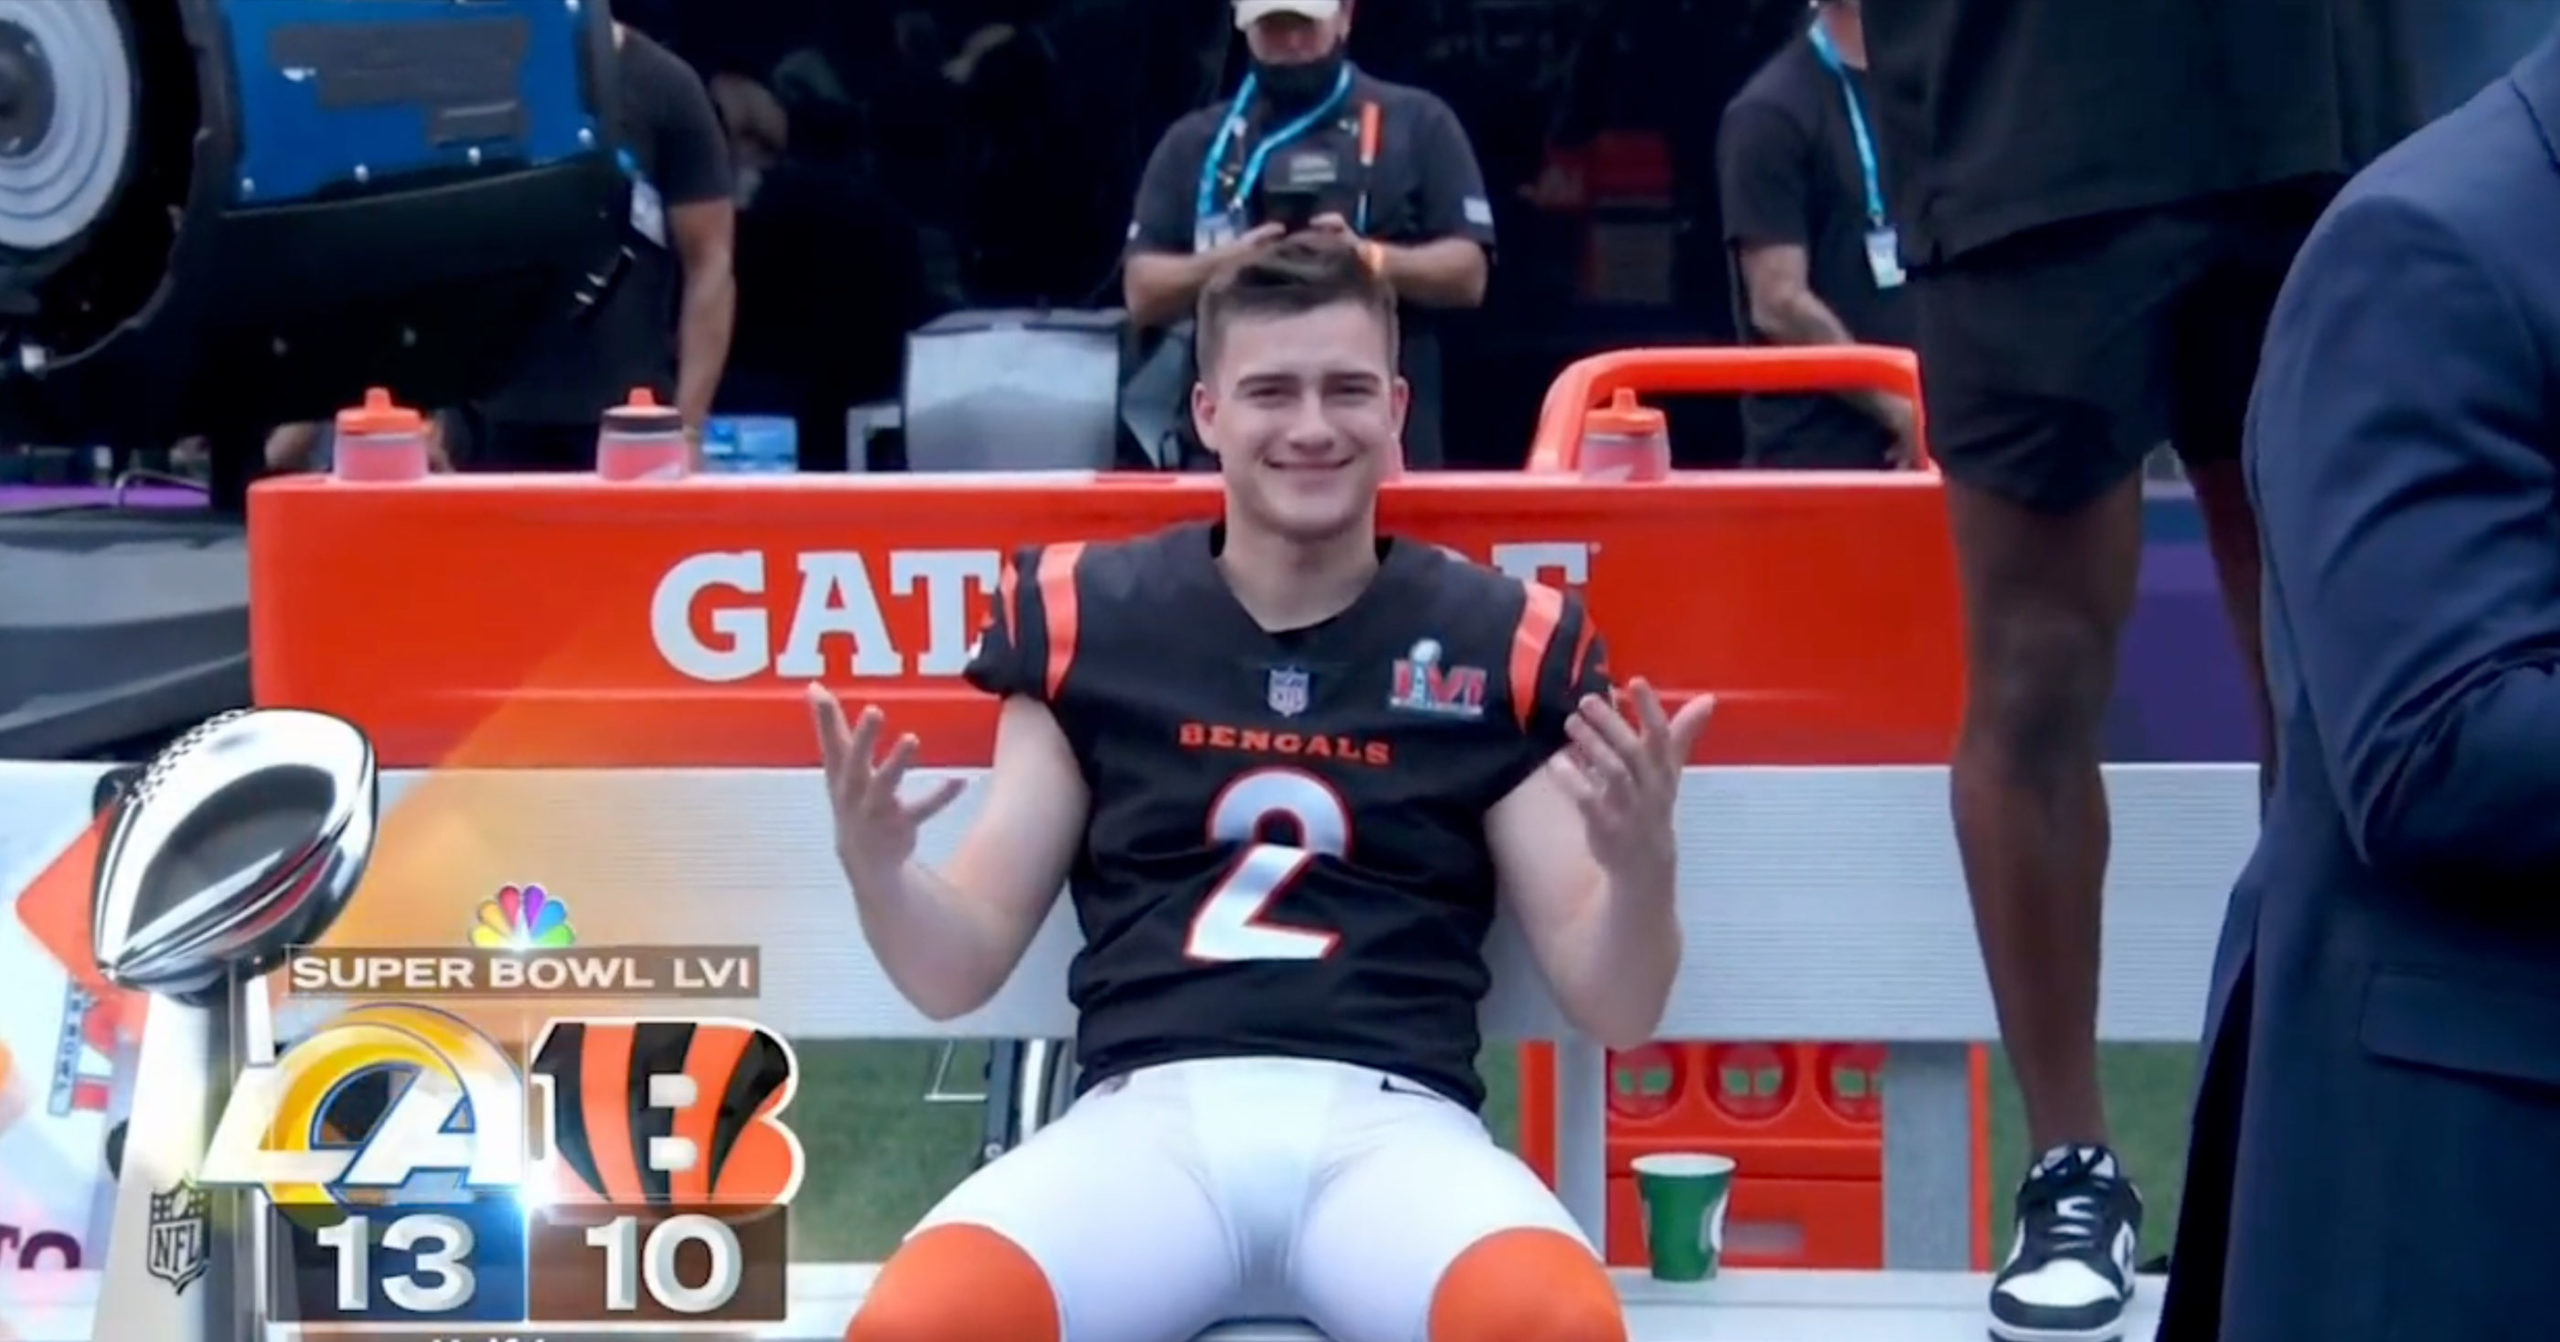 Bengals Kicker Evan McPherson Stayed On The Field To Watch The Entire